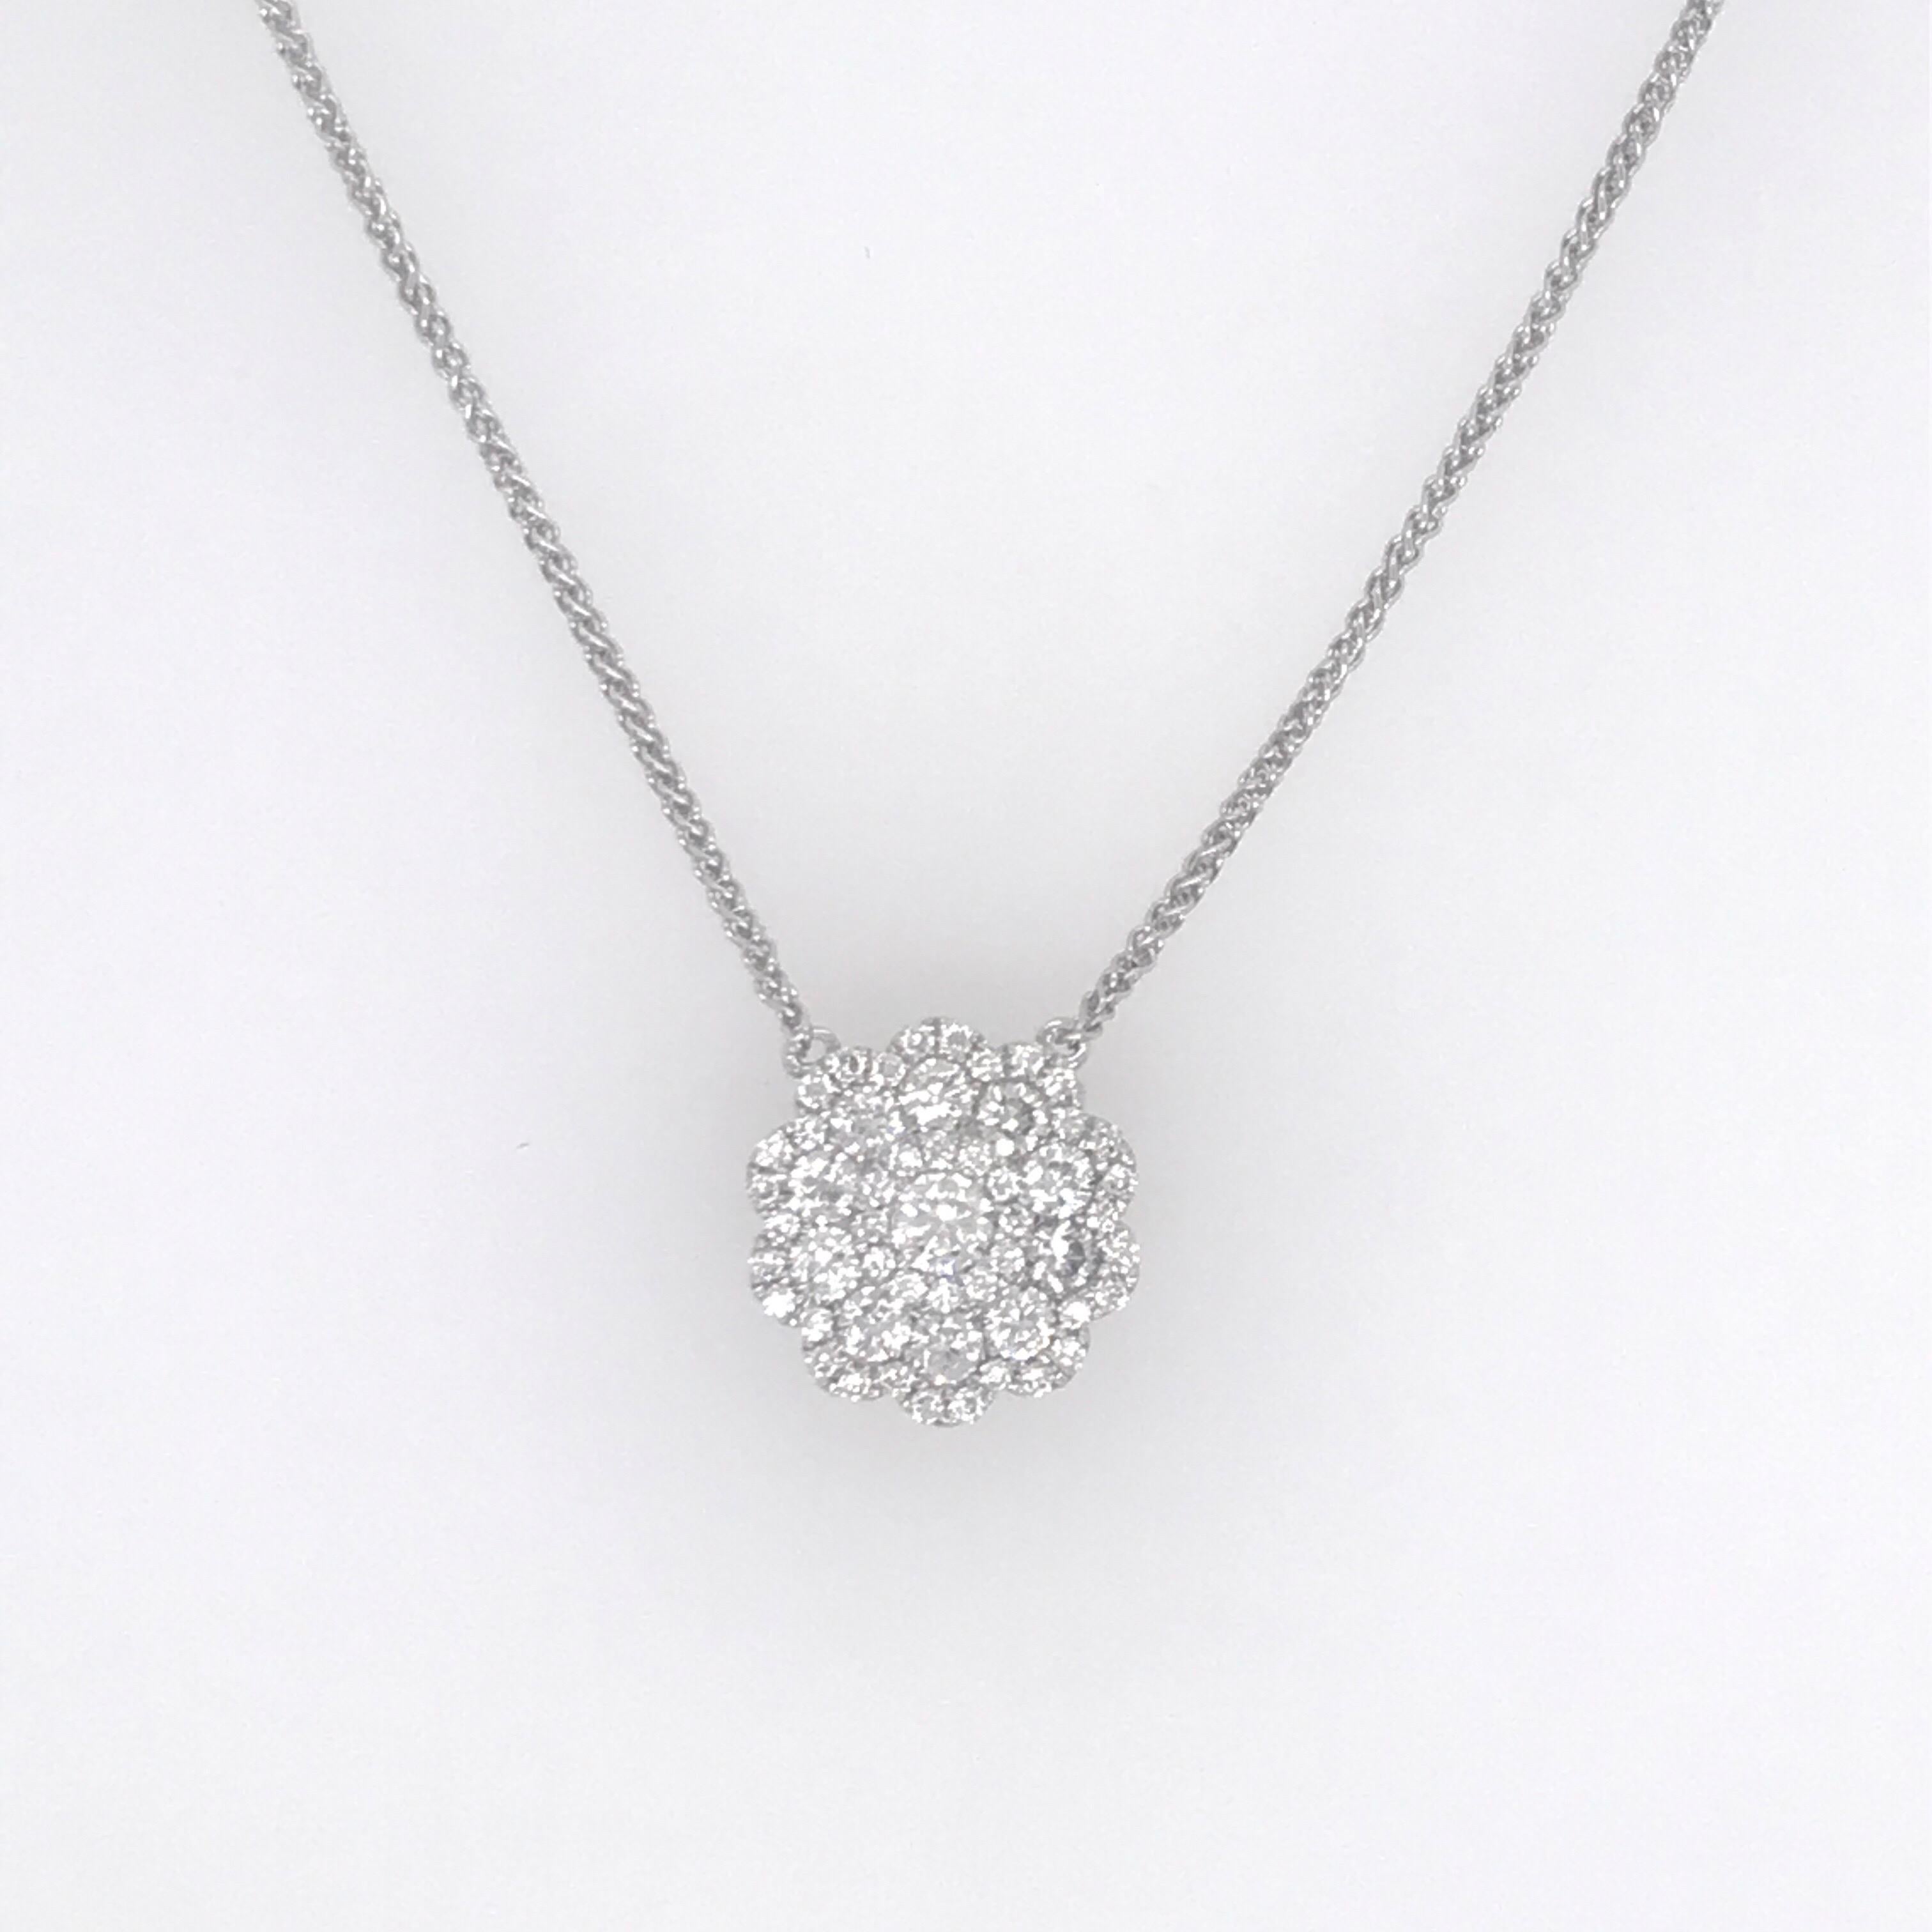 18K White gold pendant necklace featuring a floral motif of 53 round brilliants weighing 0.62 carats.
Color G-H
2.8 grams